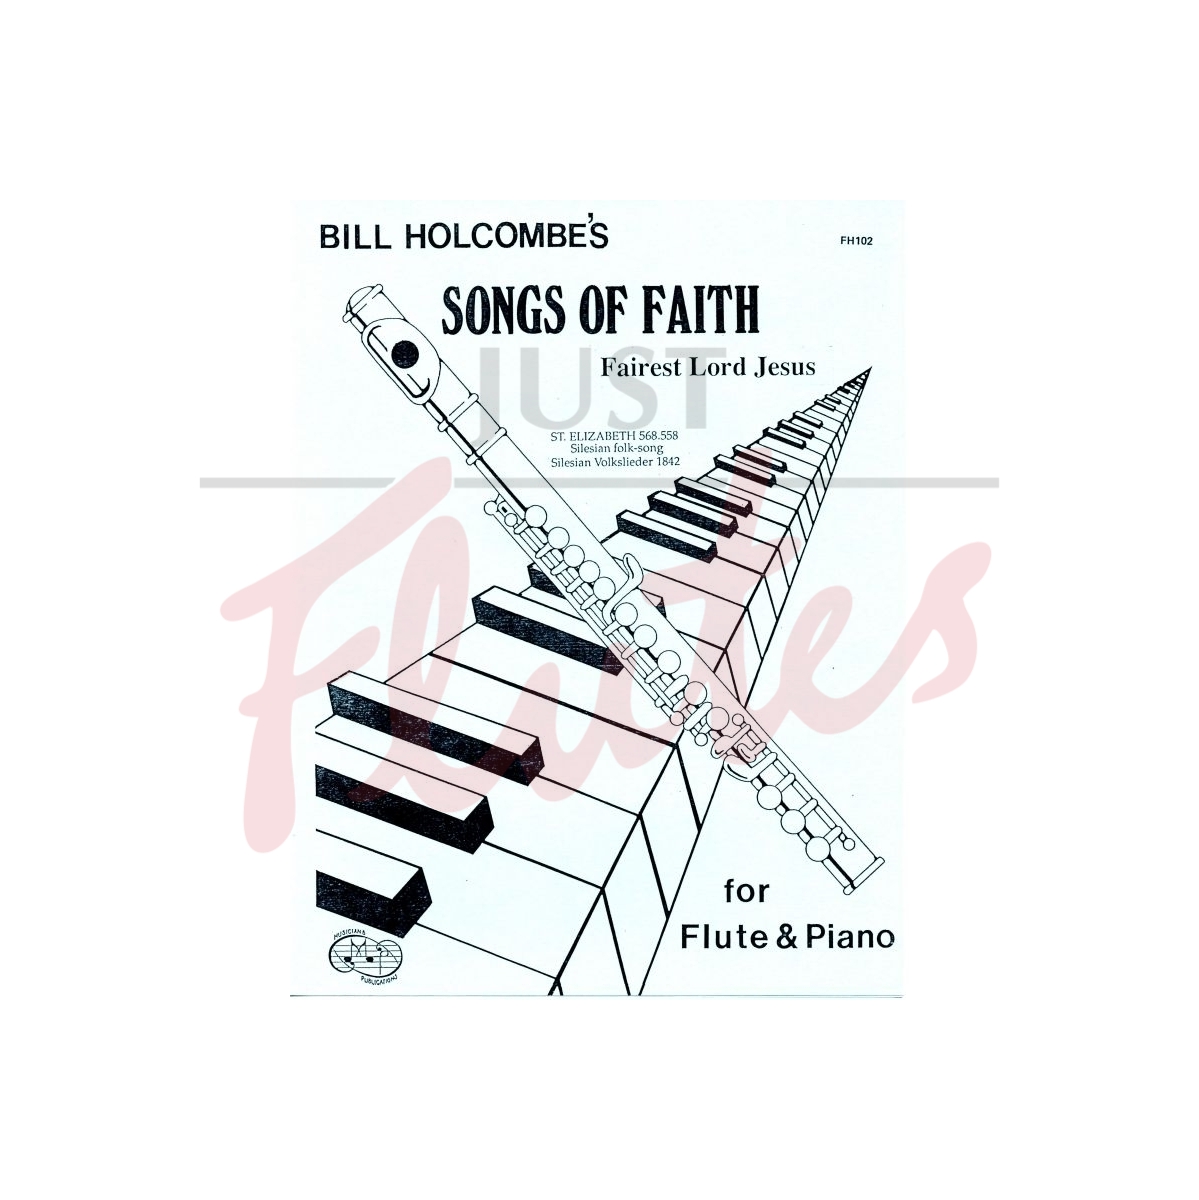 Fairest Lord Jesus [Flute and Piano]